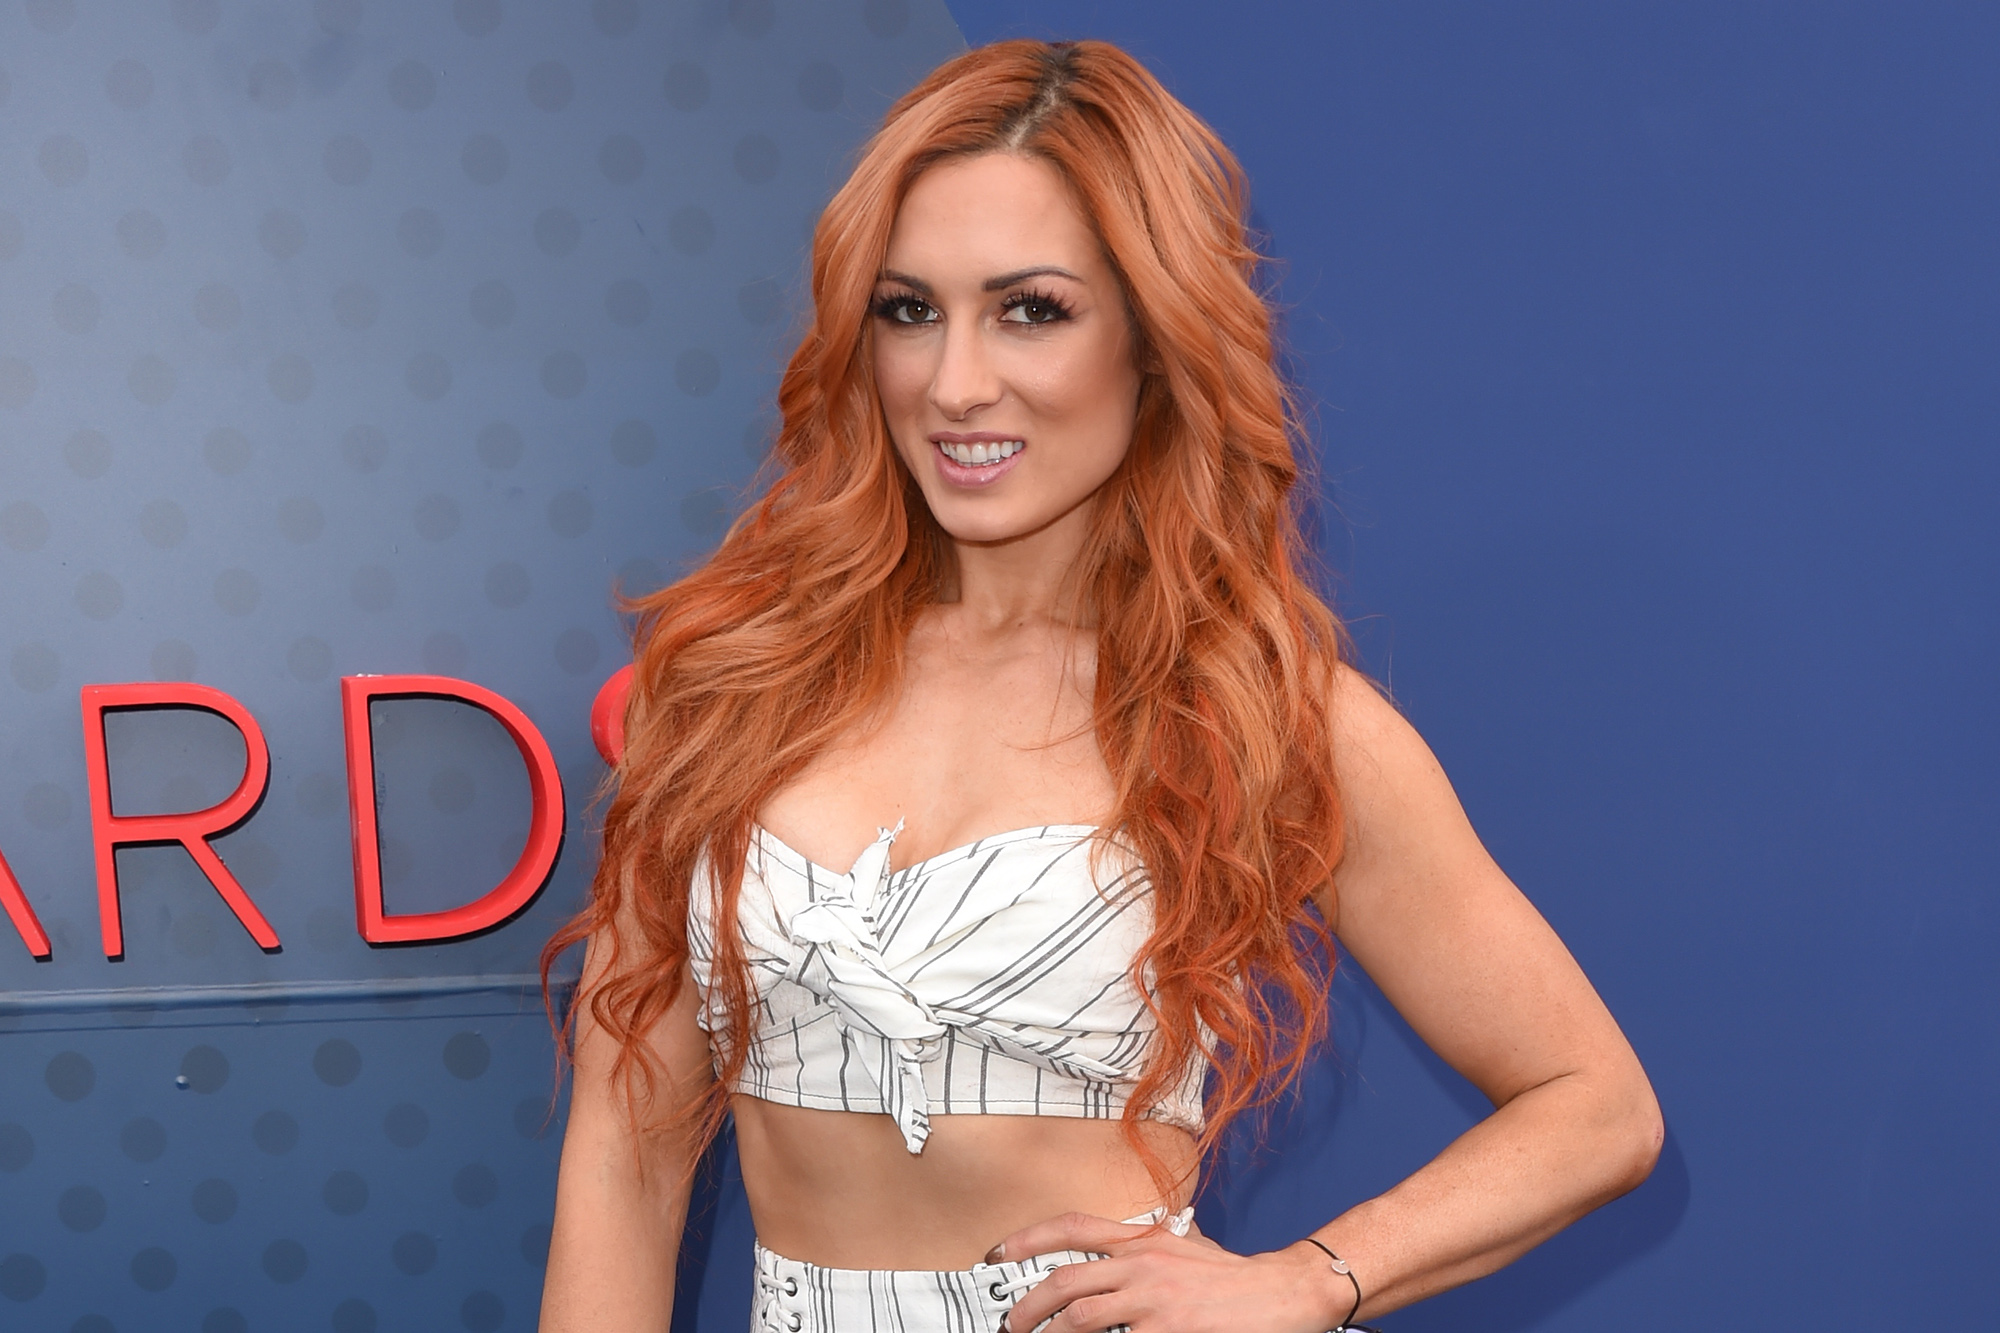 choy reyes share wwe becky lynch naked photos